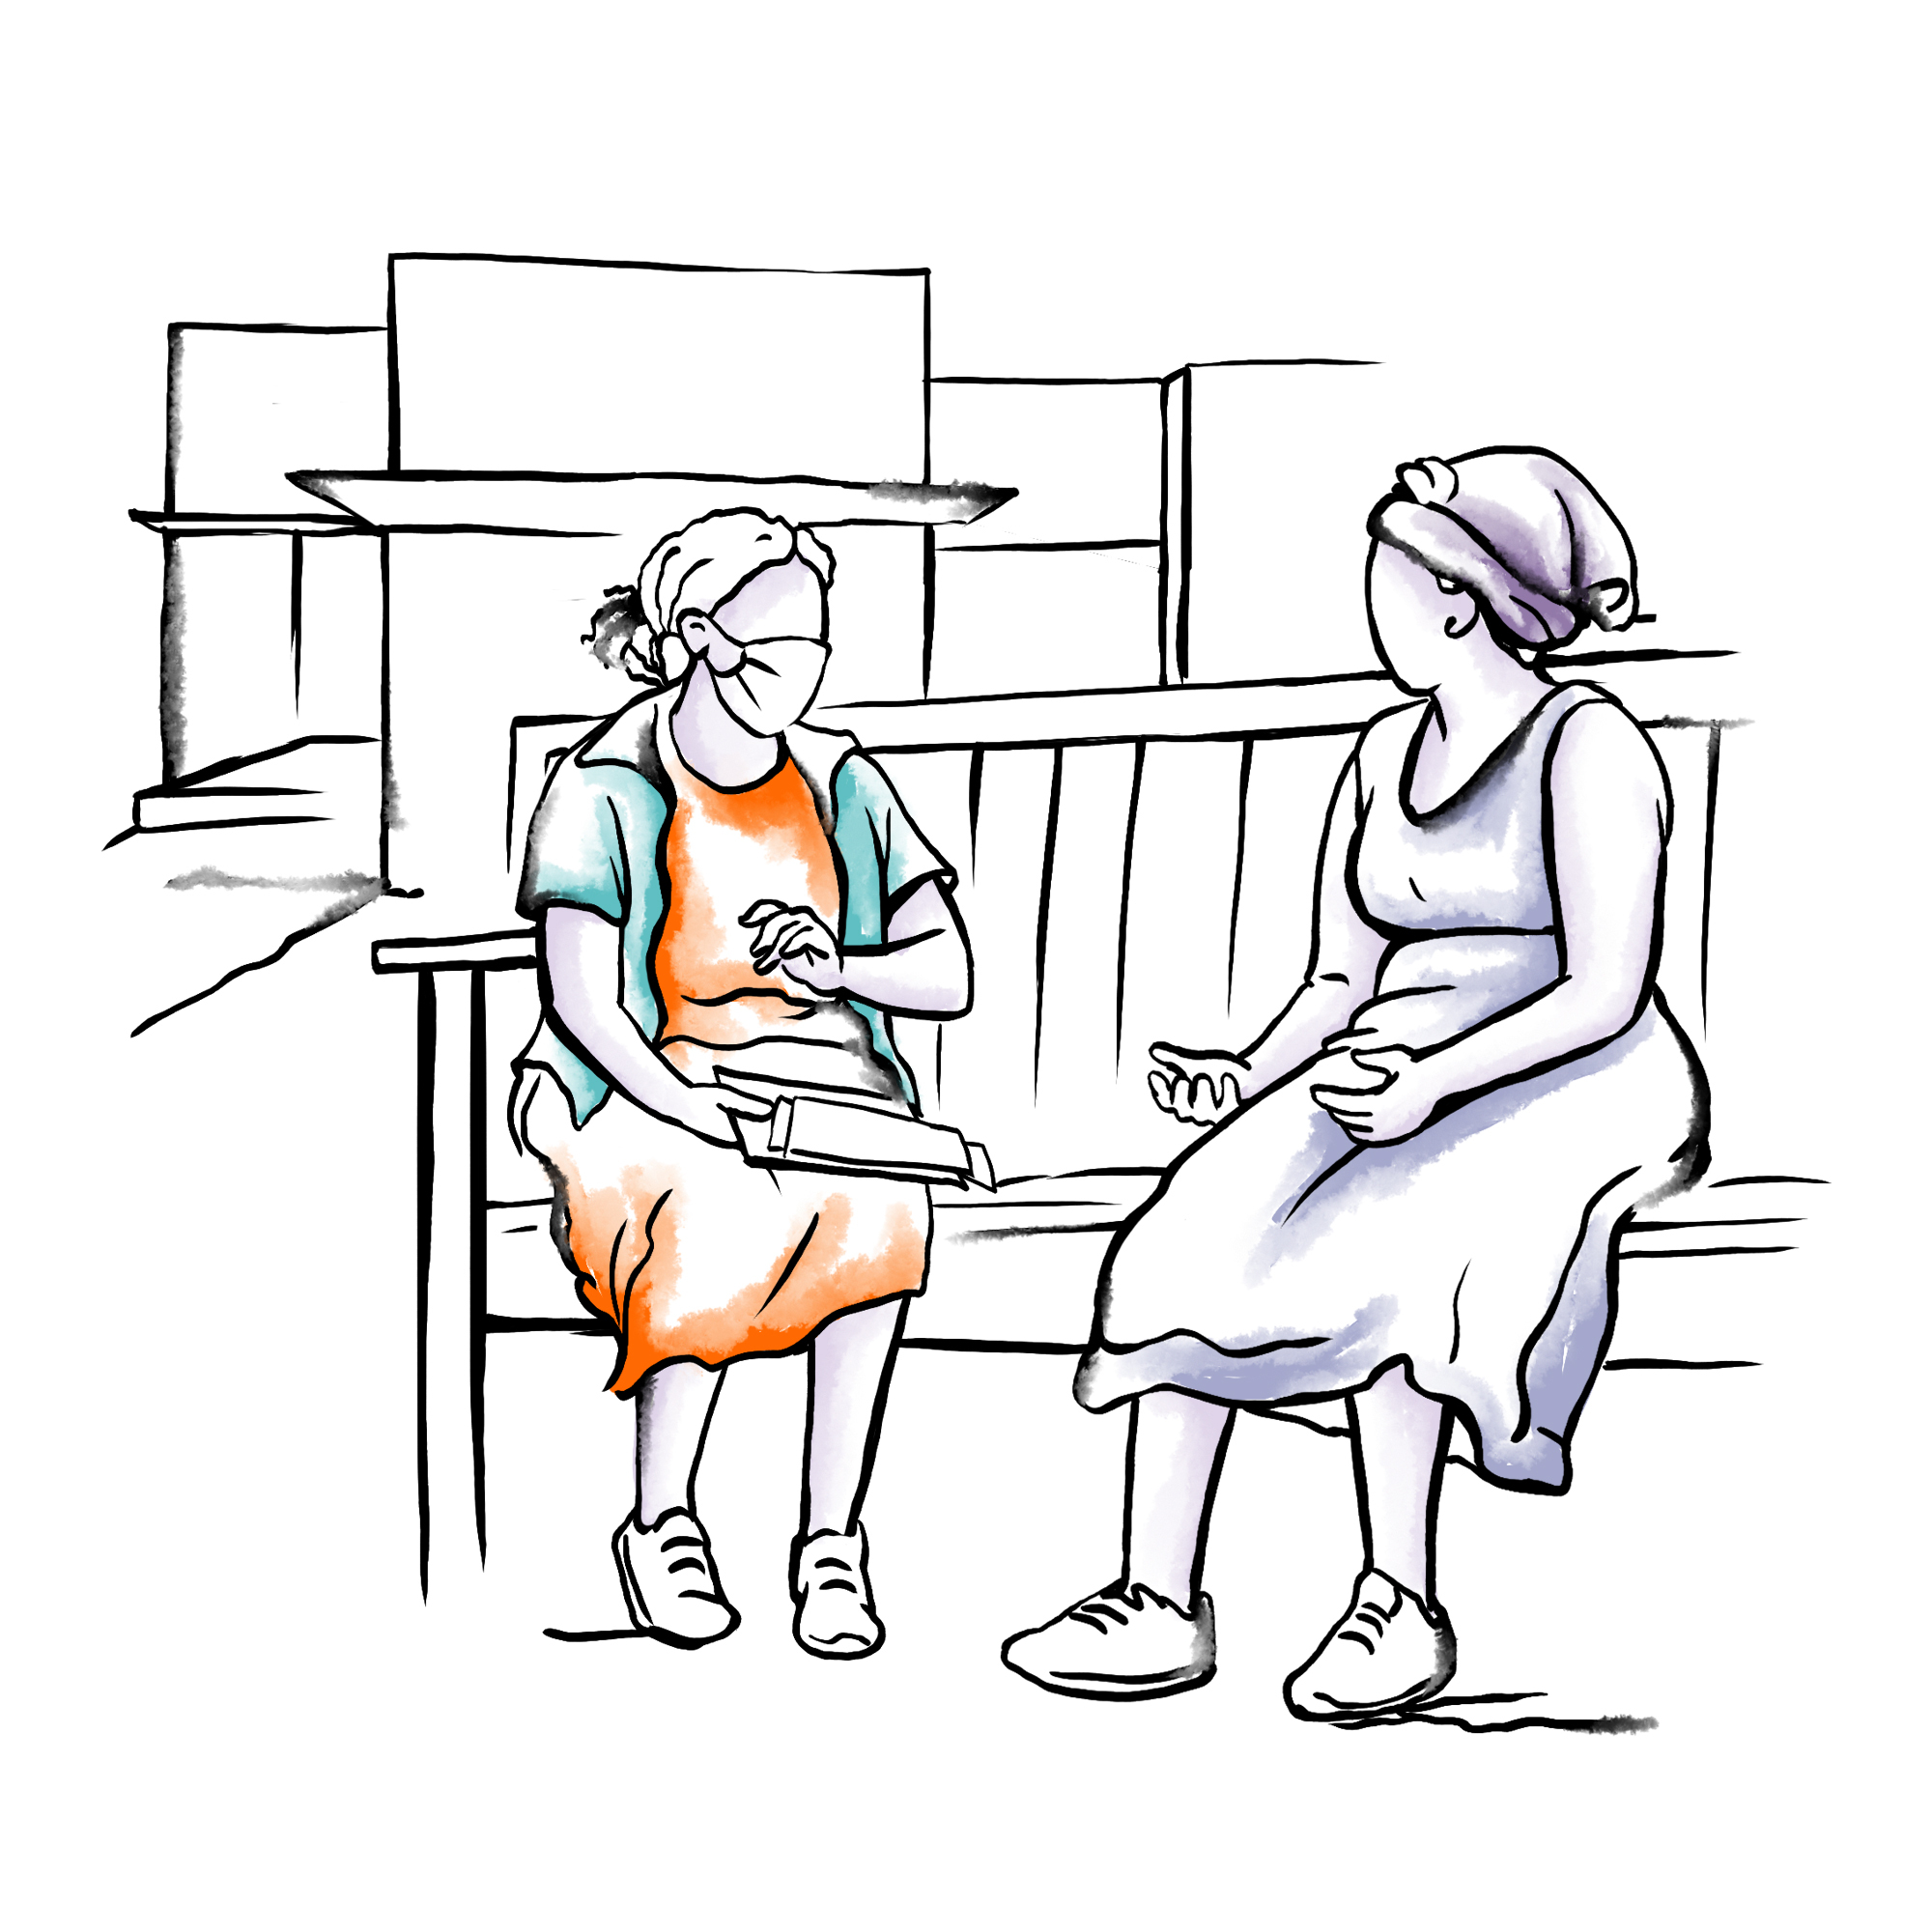 Illustration Of Two Women Sitting On A Bench And Speaking To Each Other. The Woman On The Left Has A Nose Mask On